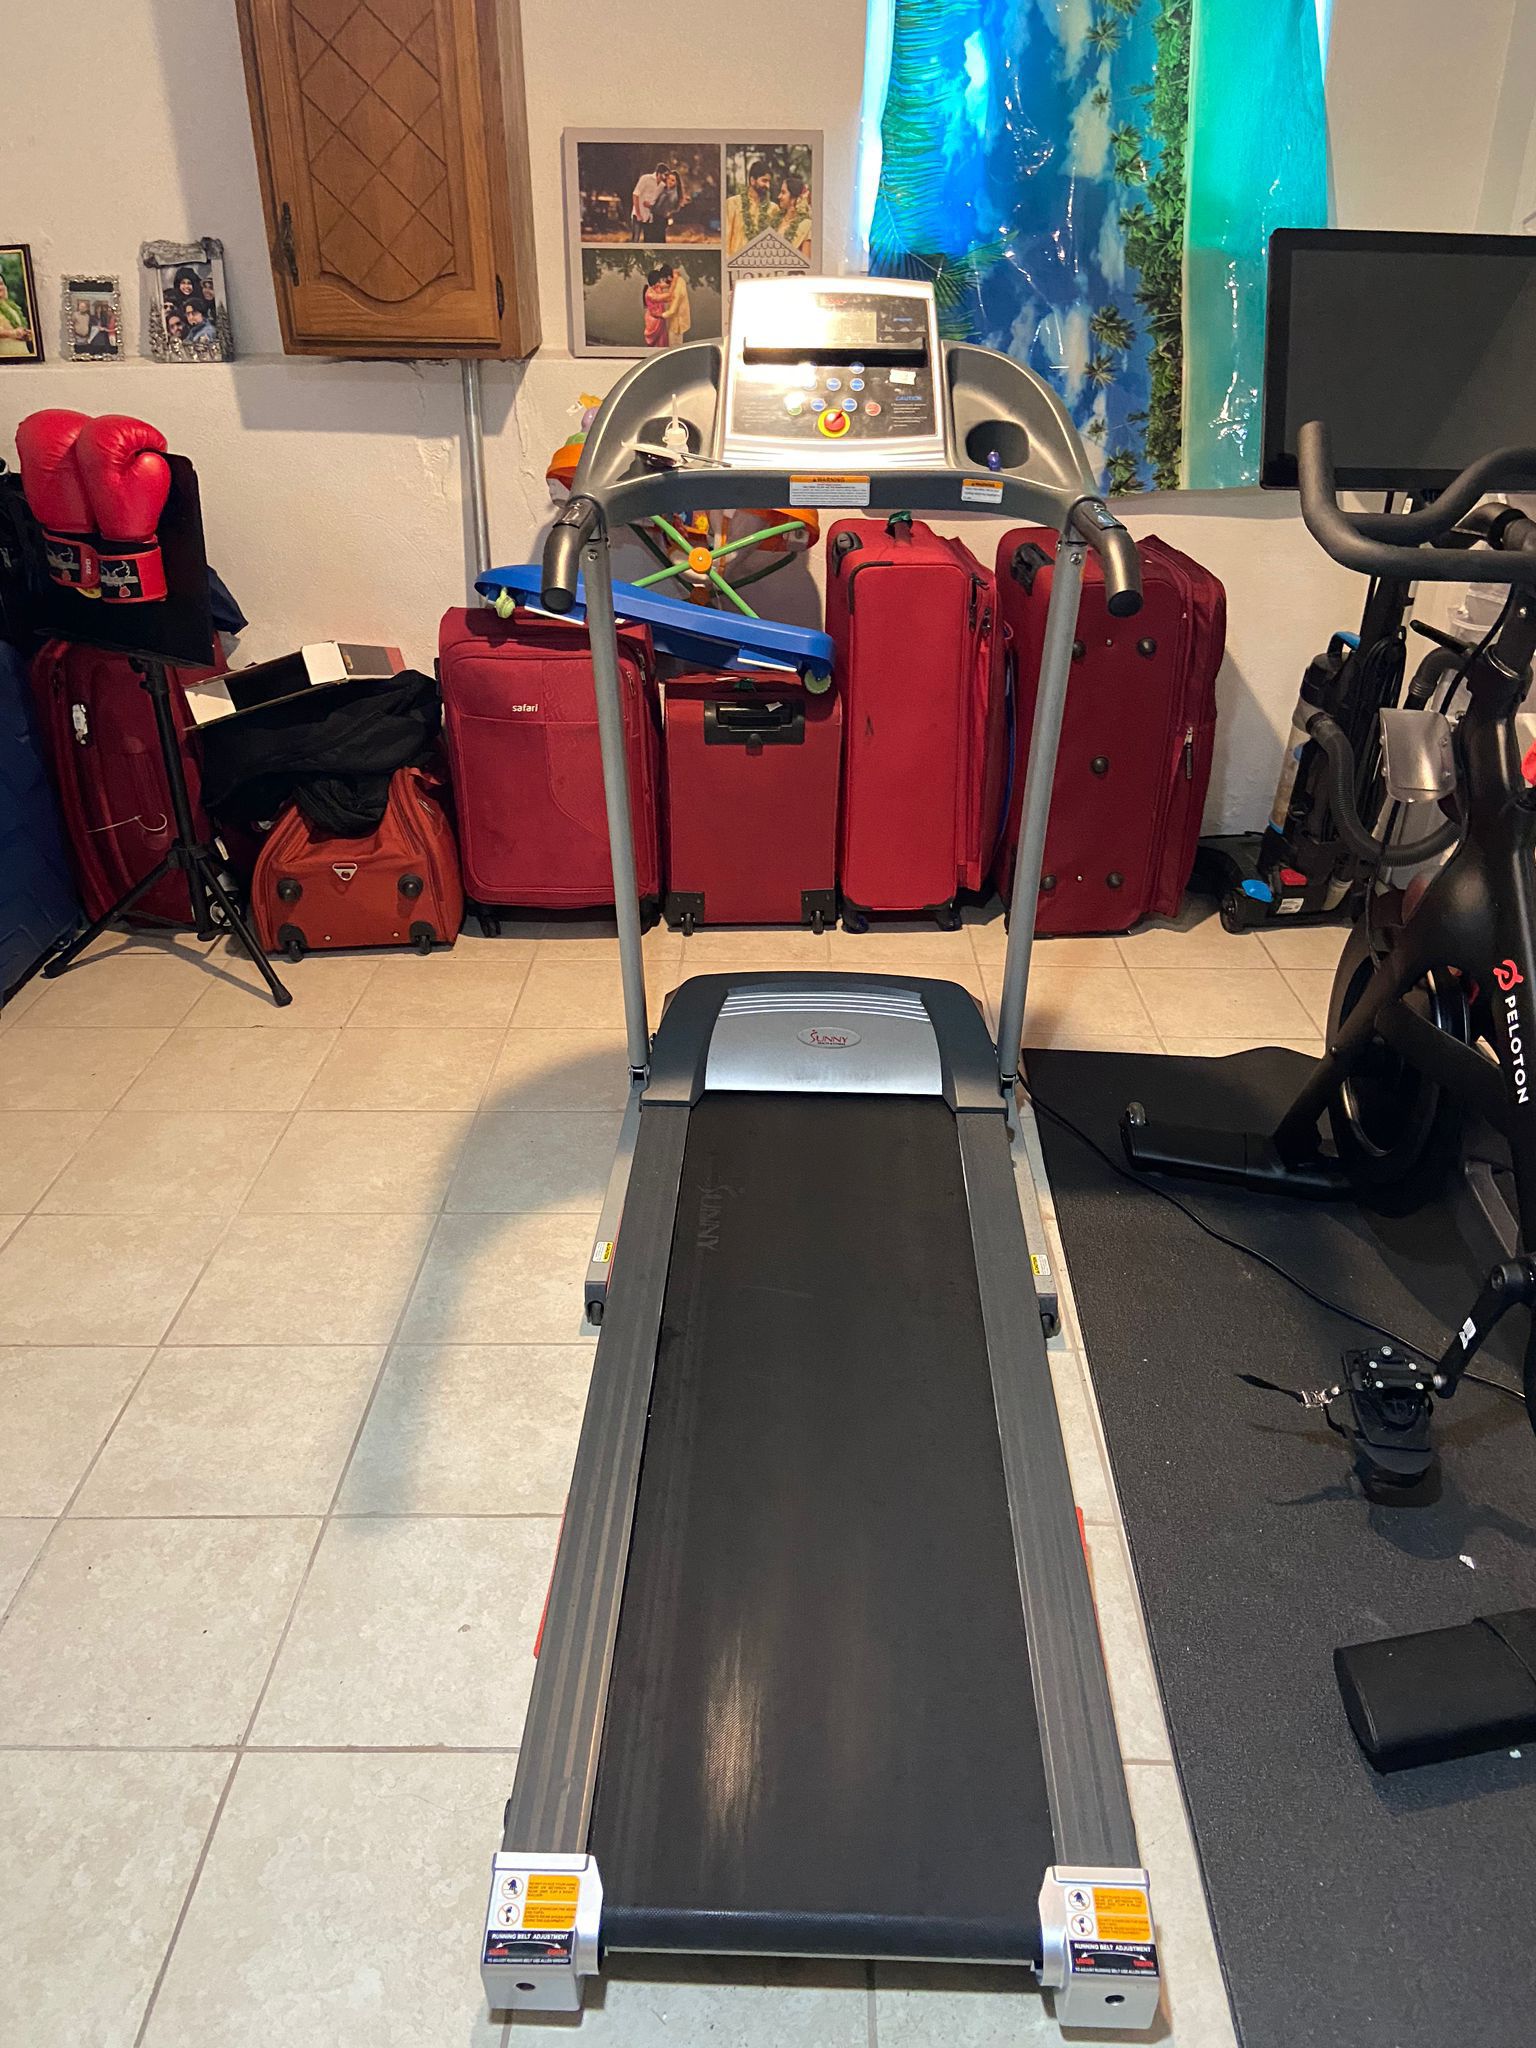 Barely Used New Treadmill For Sale - Purchased 8 Months Back